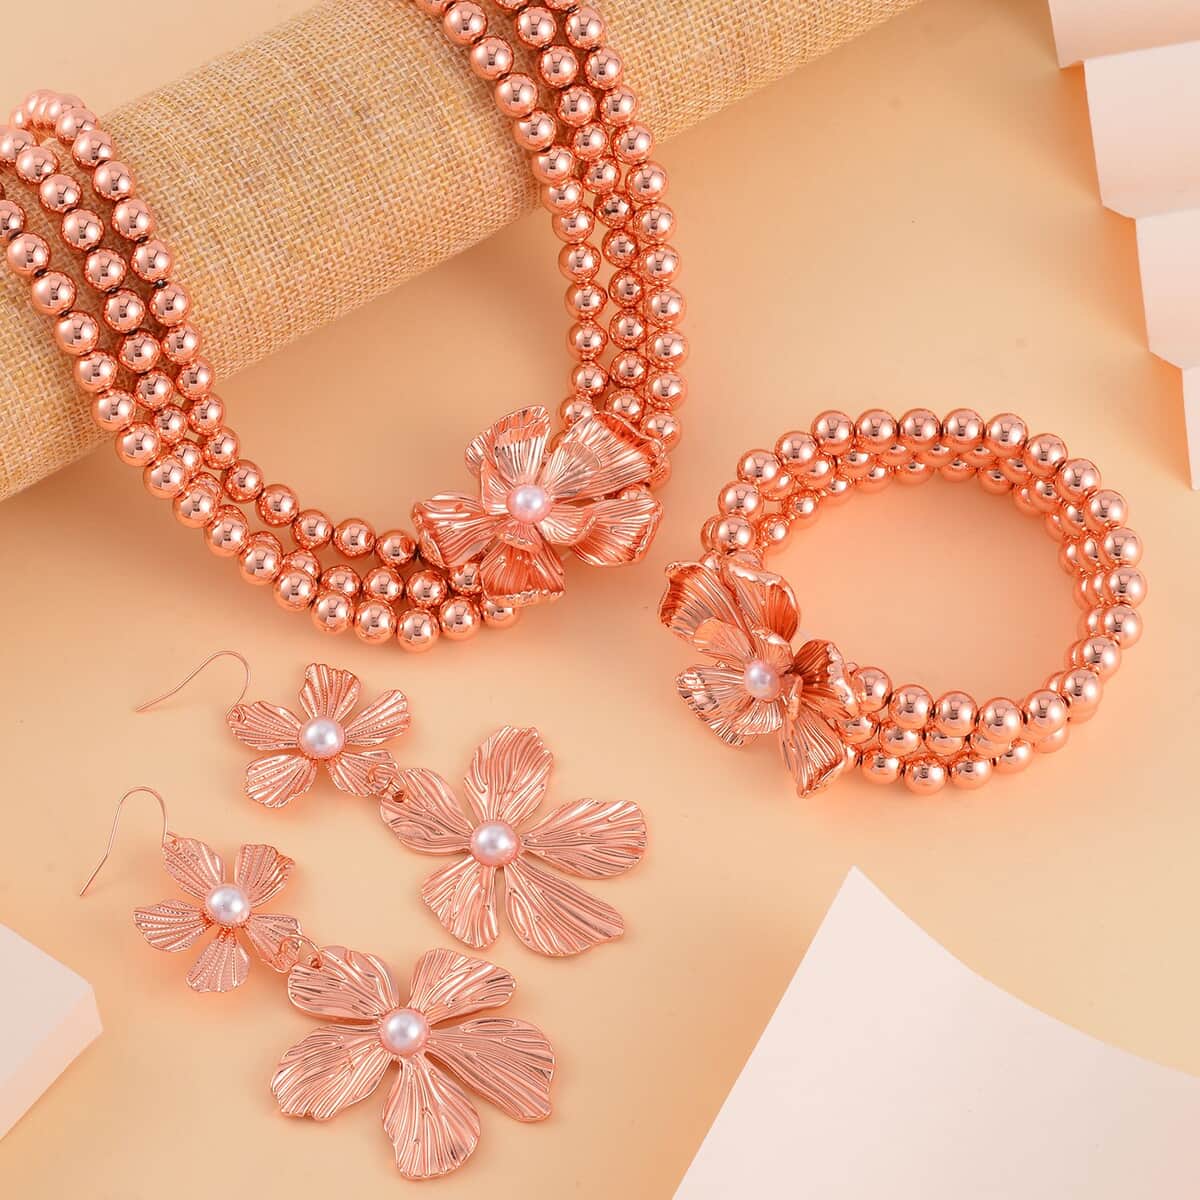 Simulated Pearl Flower Necklace and Bracelet (7-7.5In) and Earrings in Rosetone 16-20 Inches image number 1